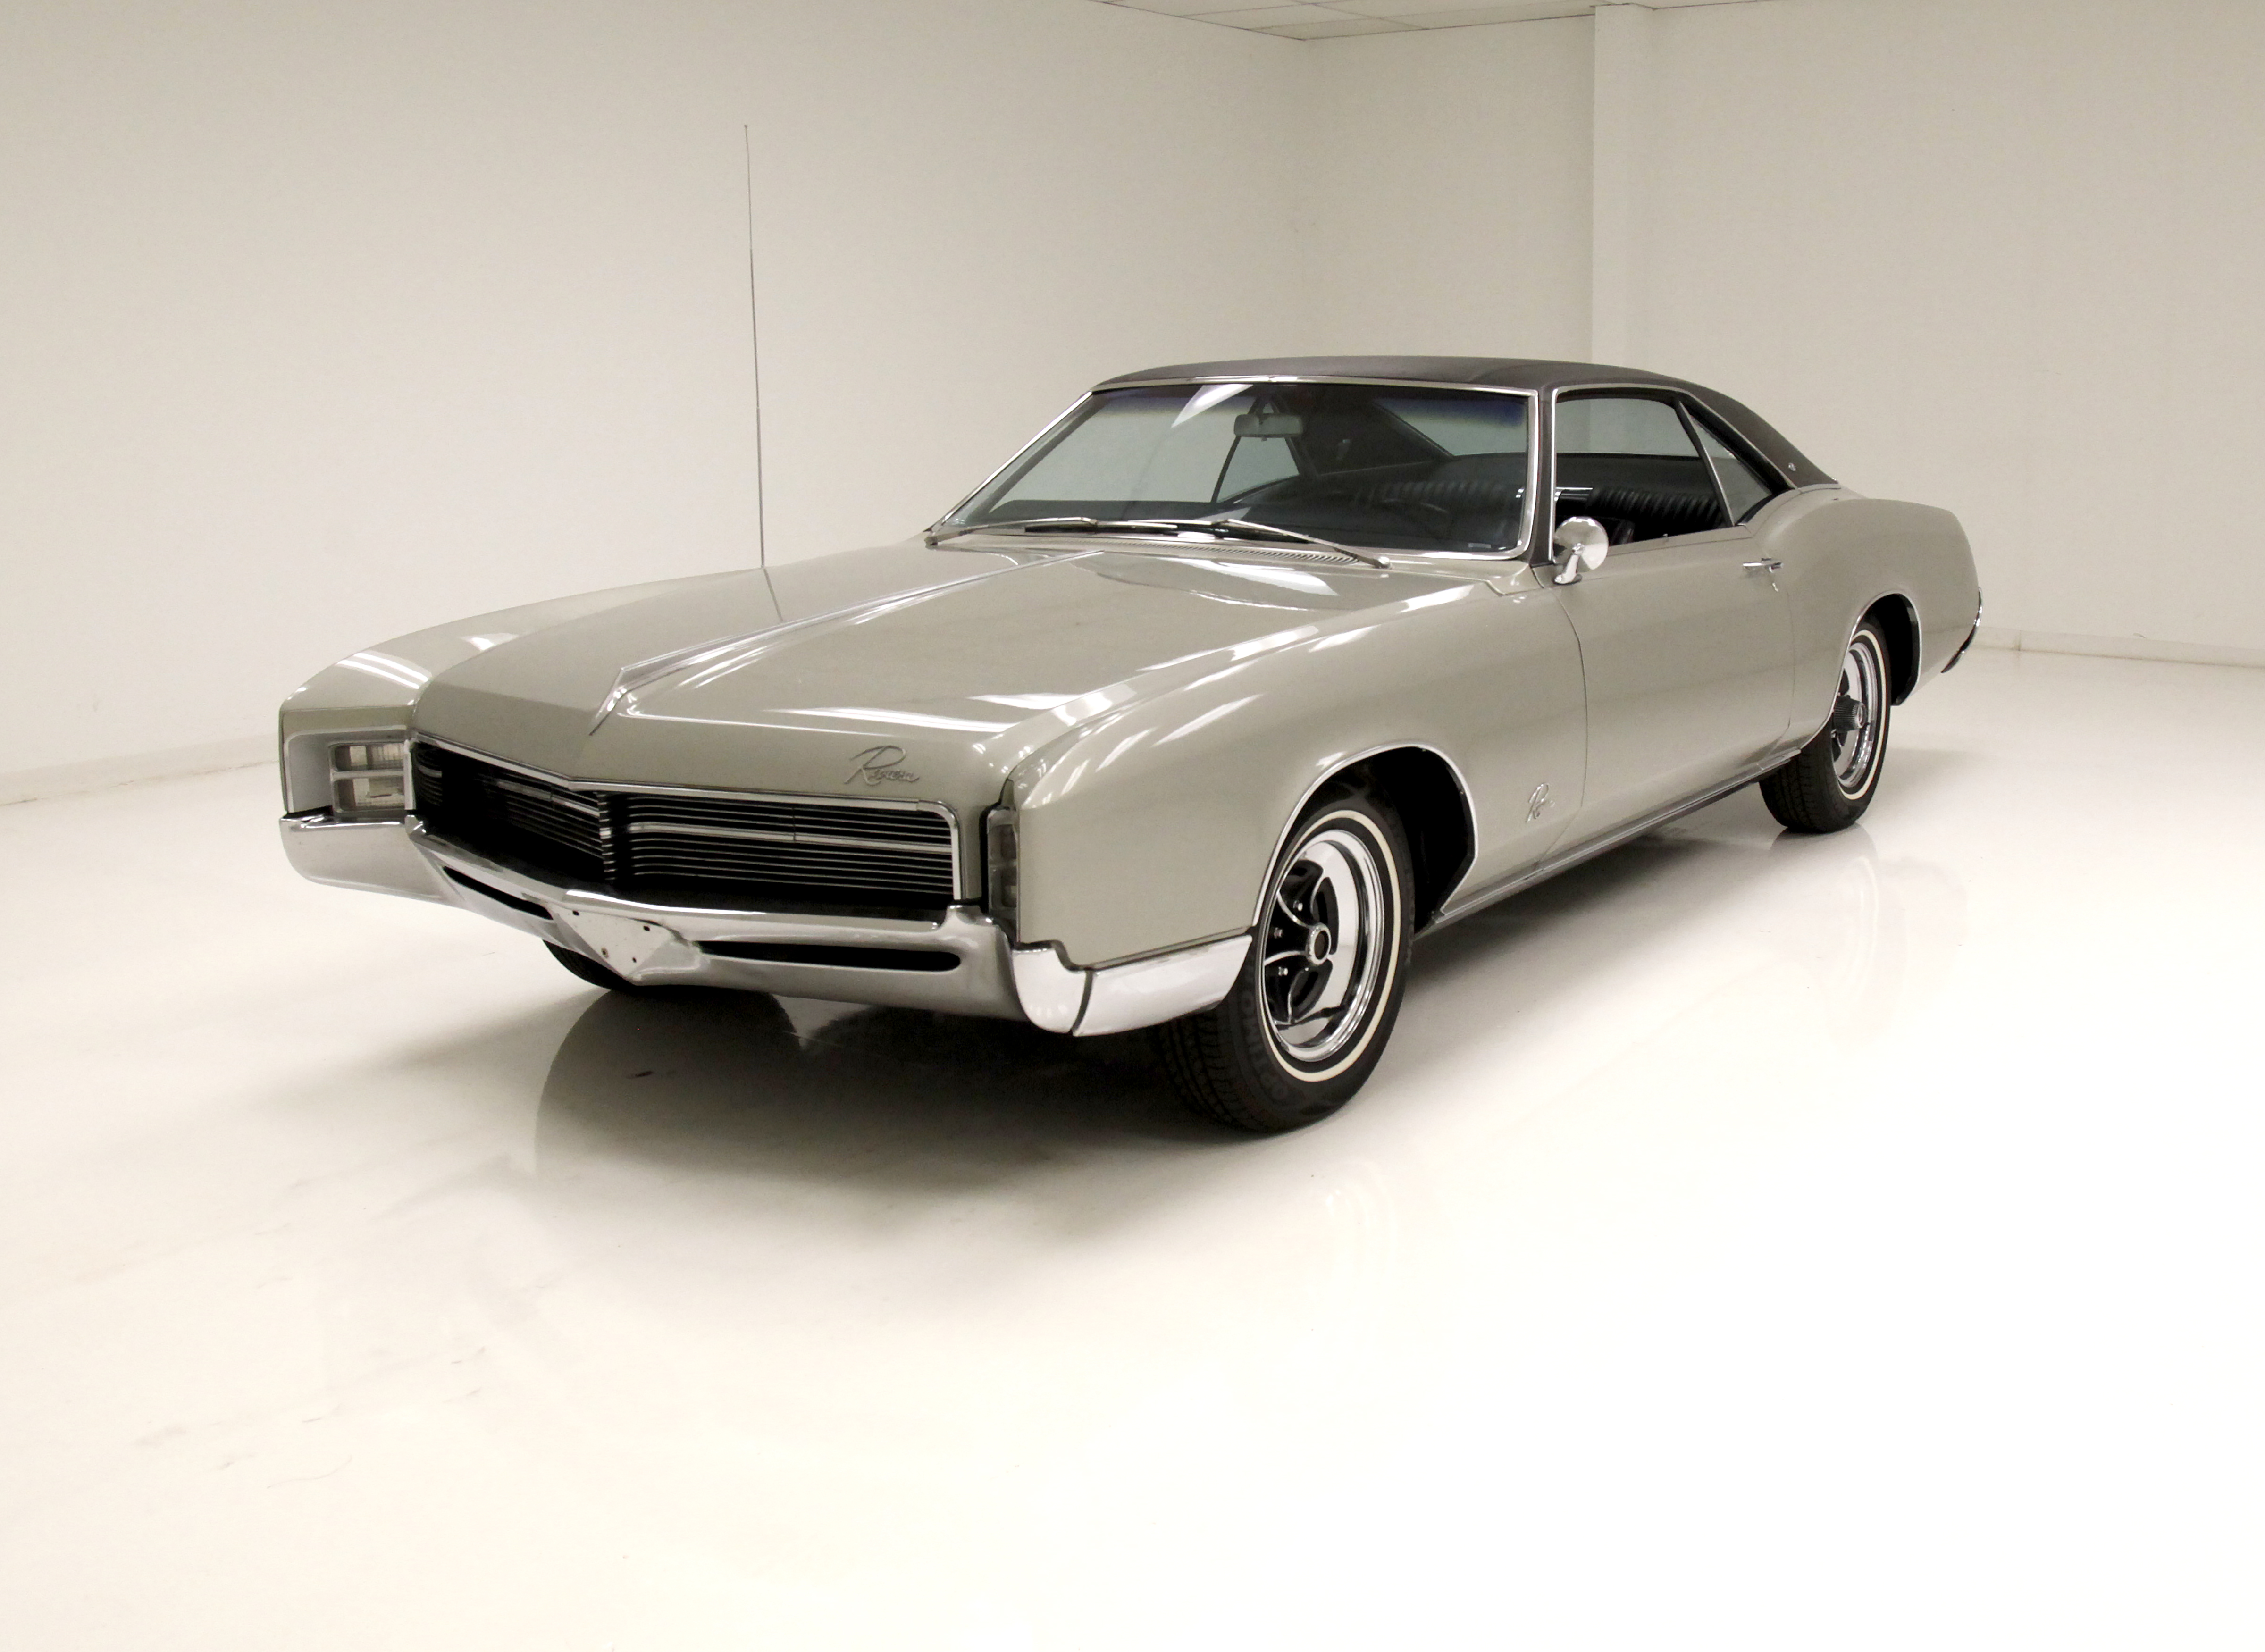 hasard warning flasher - Buick Riviera - Antique Automobile Club of America  - Discussion Forums